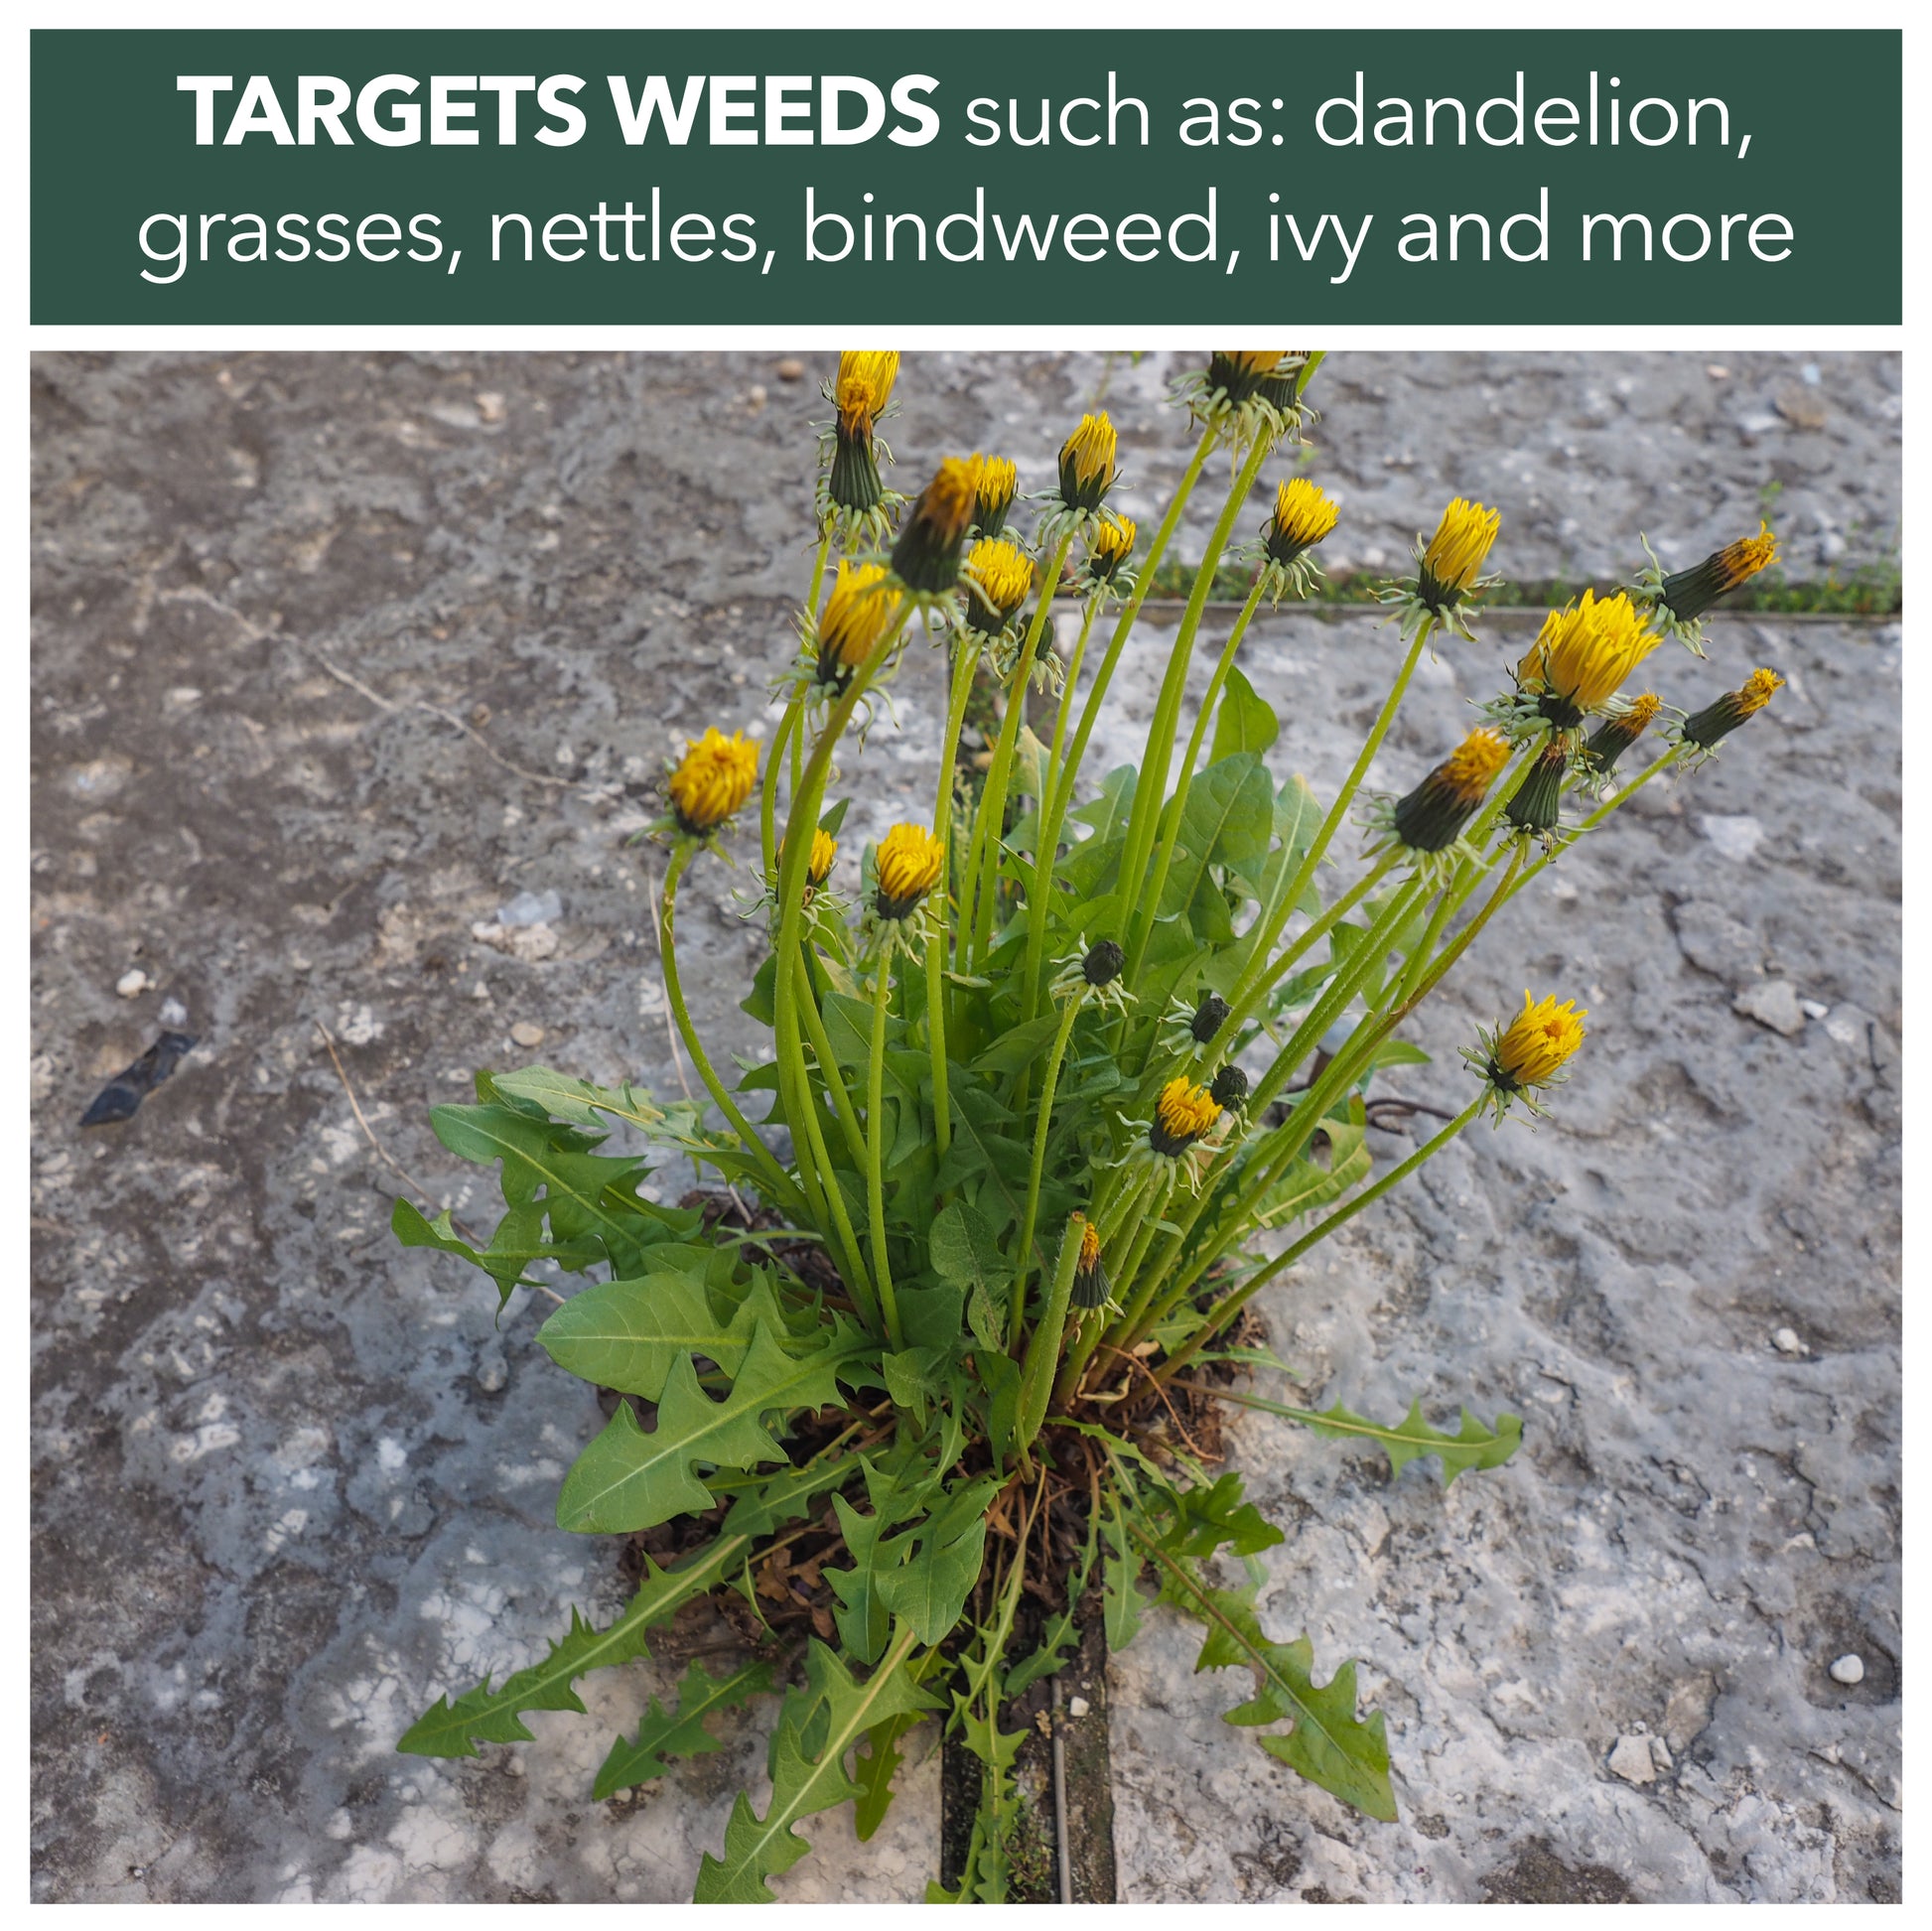 targets weeds such as dandelion, grasses, nettles, bindweed, ivy and more